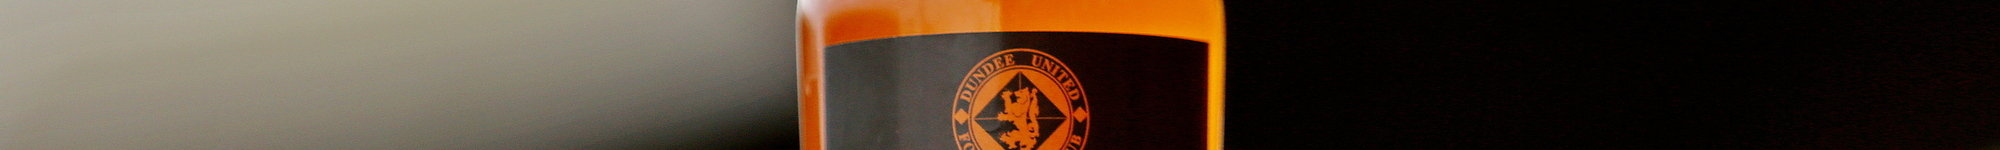 DUFC Gin on Dundee United Football Club